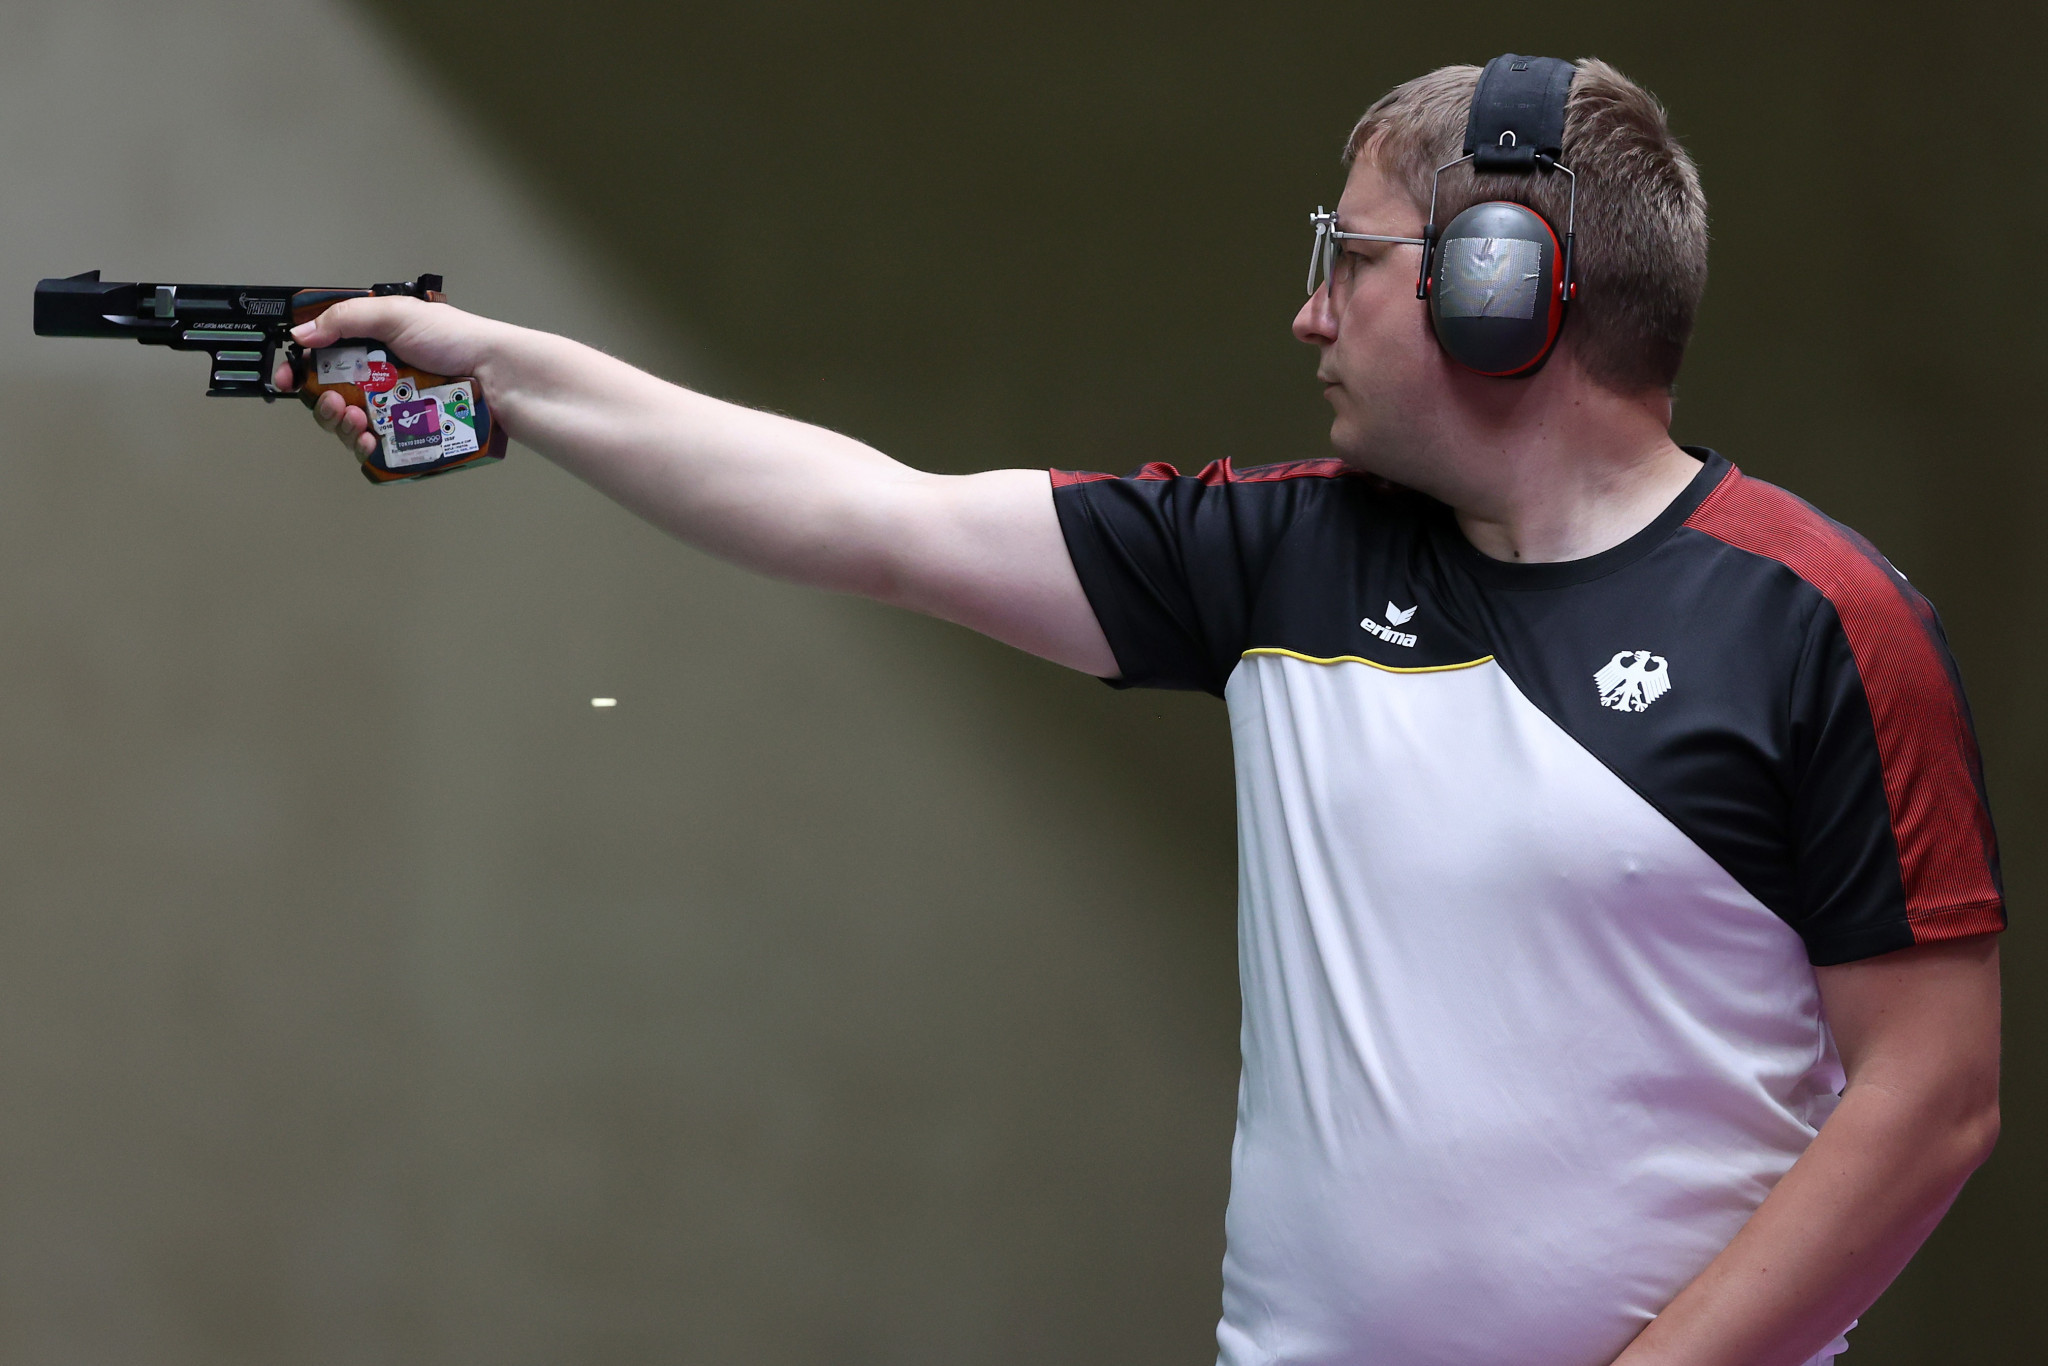 Christian Reitz proved too strong in the men’s 10m air pistol final ©Getty Images